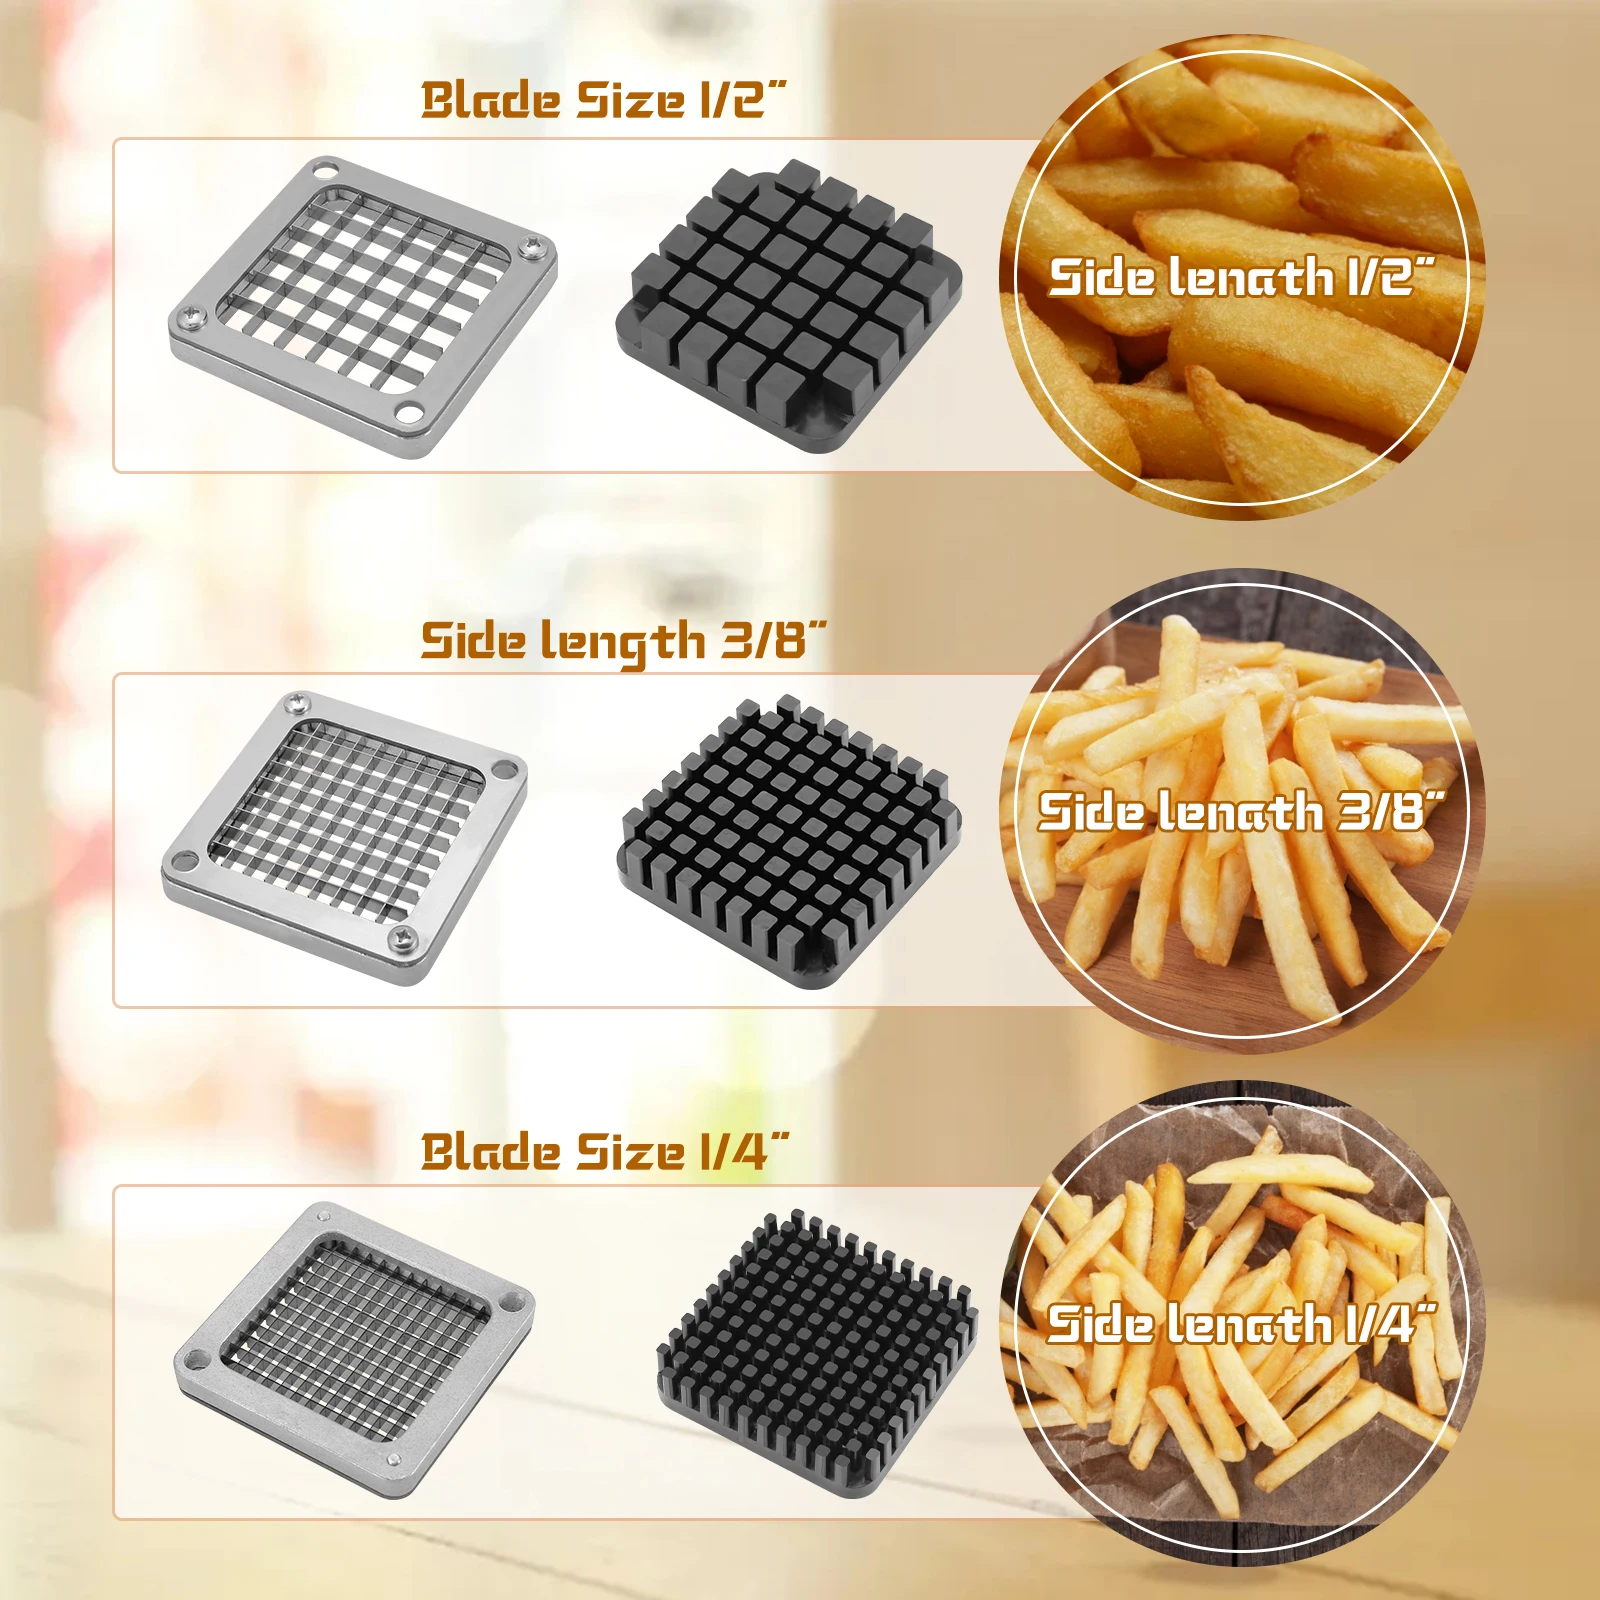  Commercial Potato Chipper,Hand French Fry Fries Making Machine, Potato  Chip Cutter with 304 Stainless Steel Blades of Size1/4 3/8 1/2 for Potato  Radish Onion Cucumber Apple : Home & Kitchen